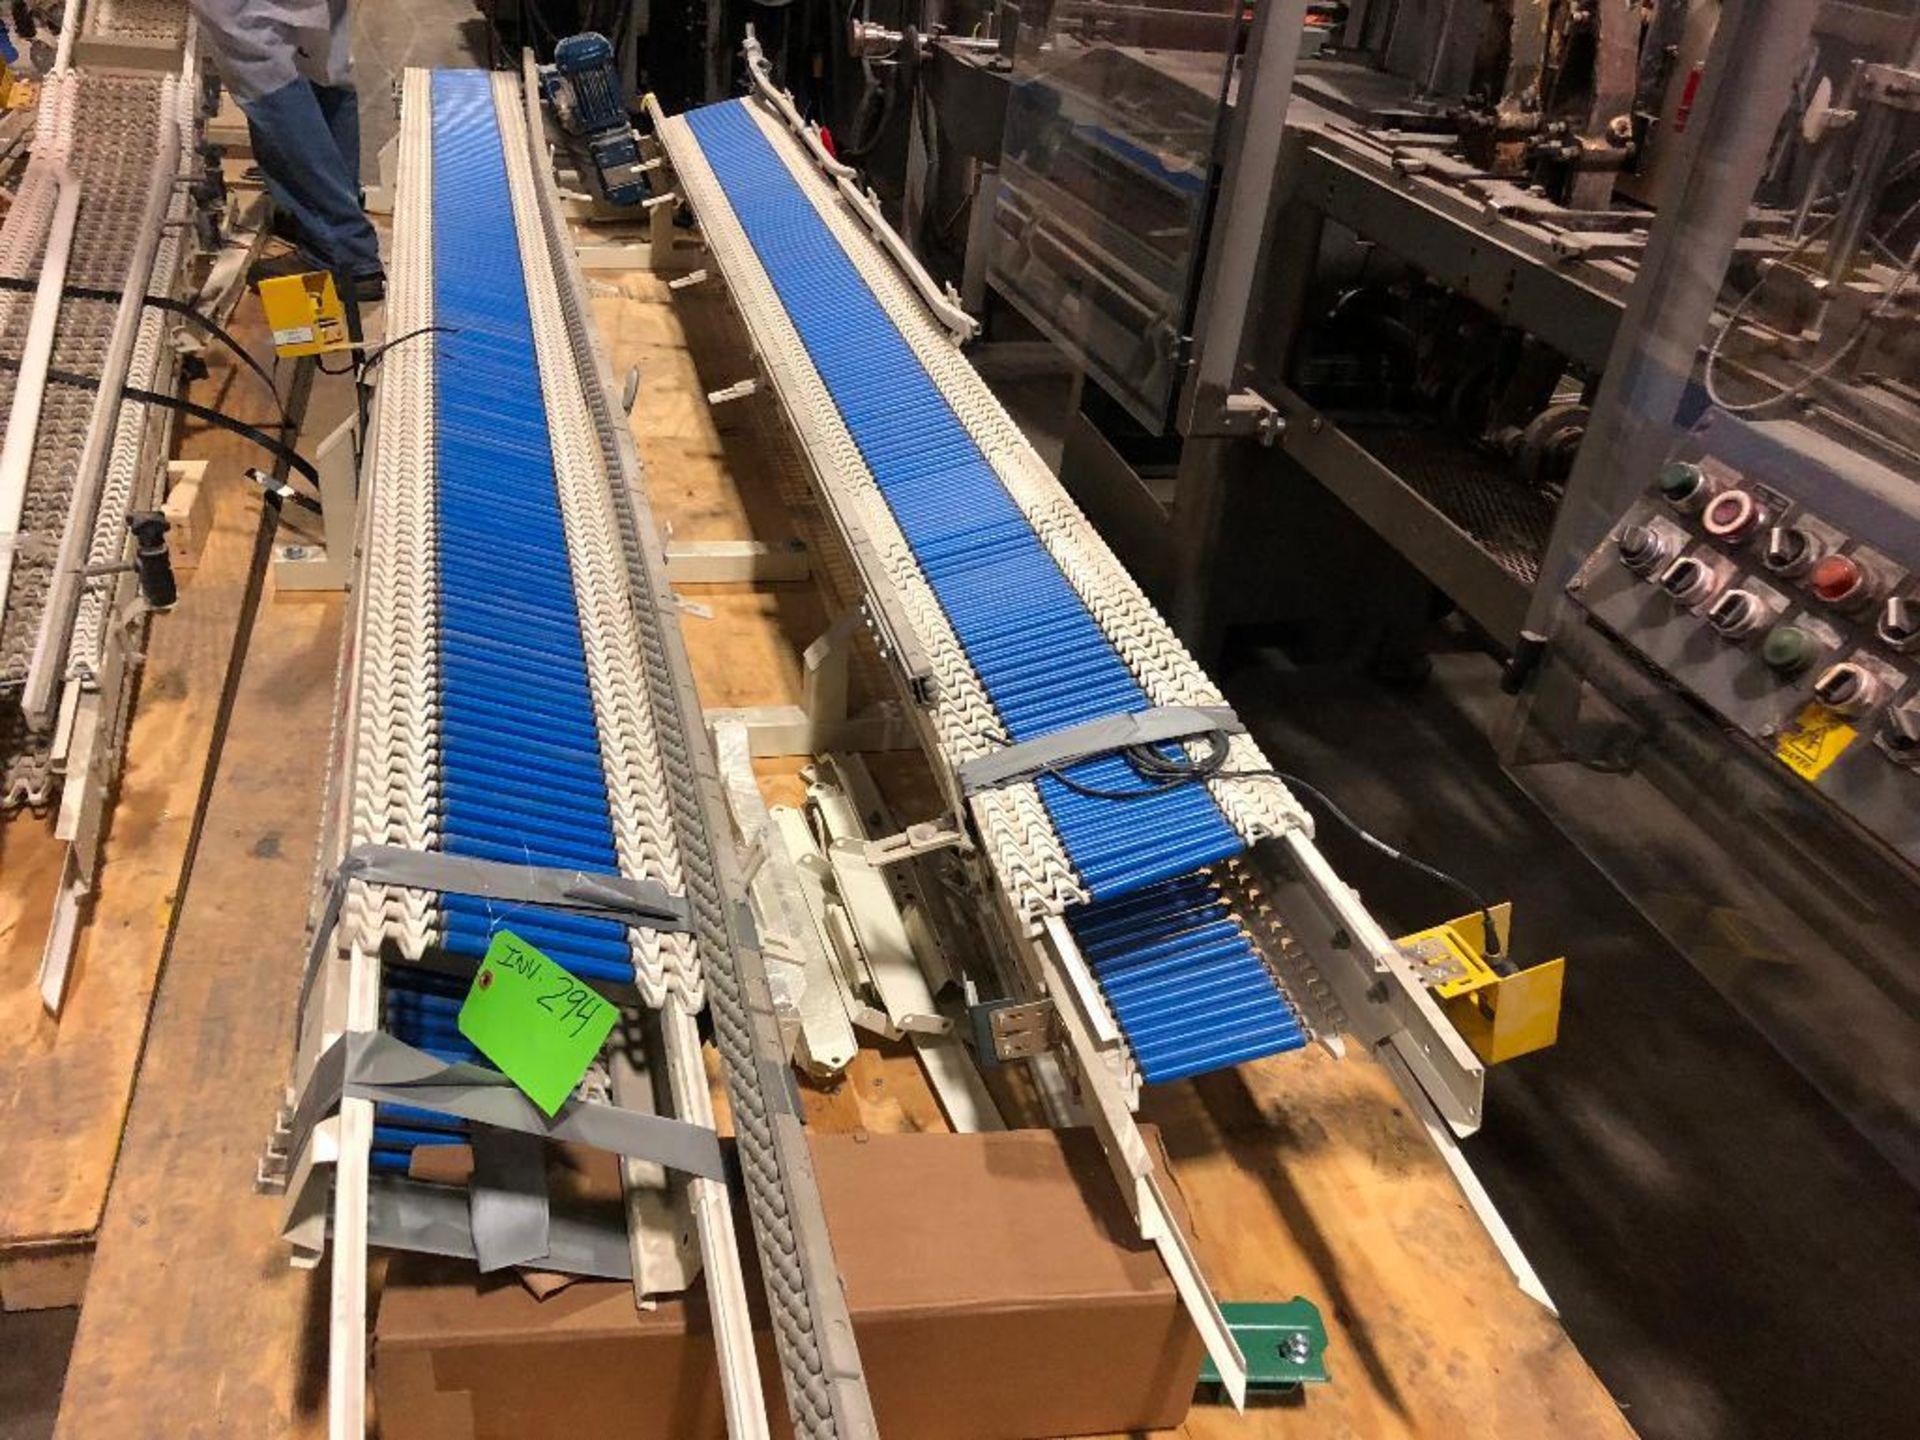 Spantech mild steel conveyor, 26 ft. long x 11 in. wide x 12 in. all, slanted bed, accumulation styl